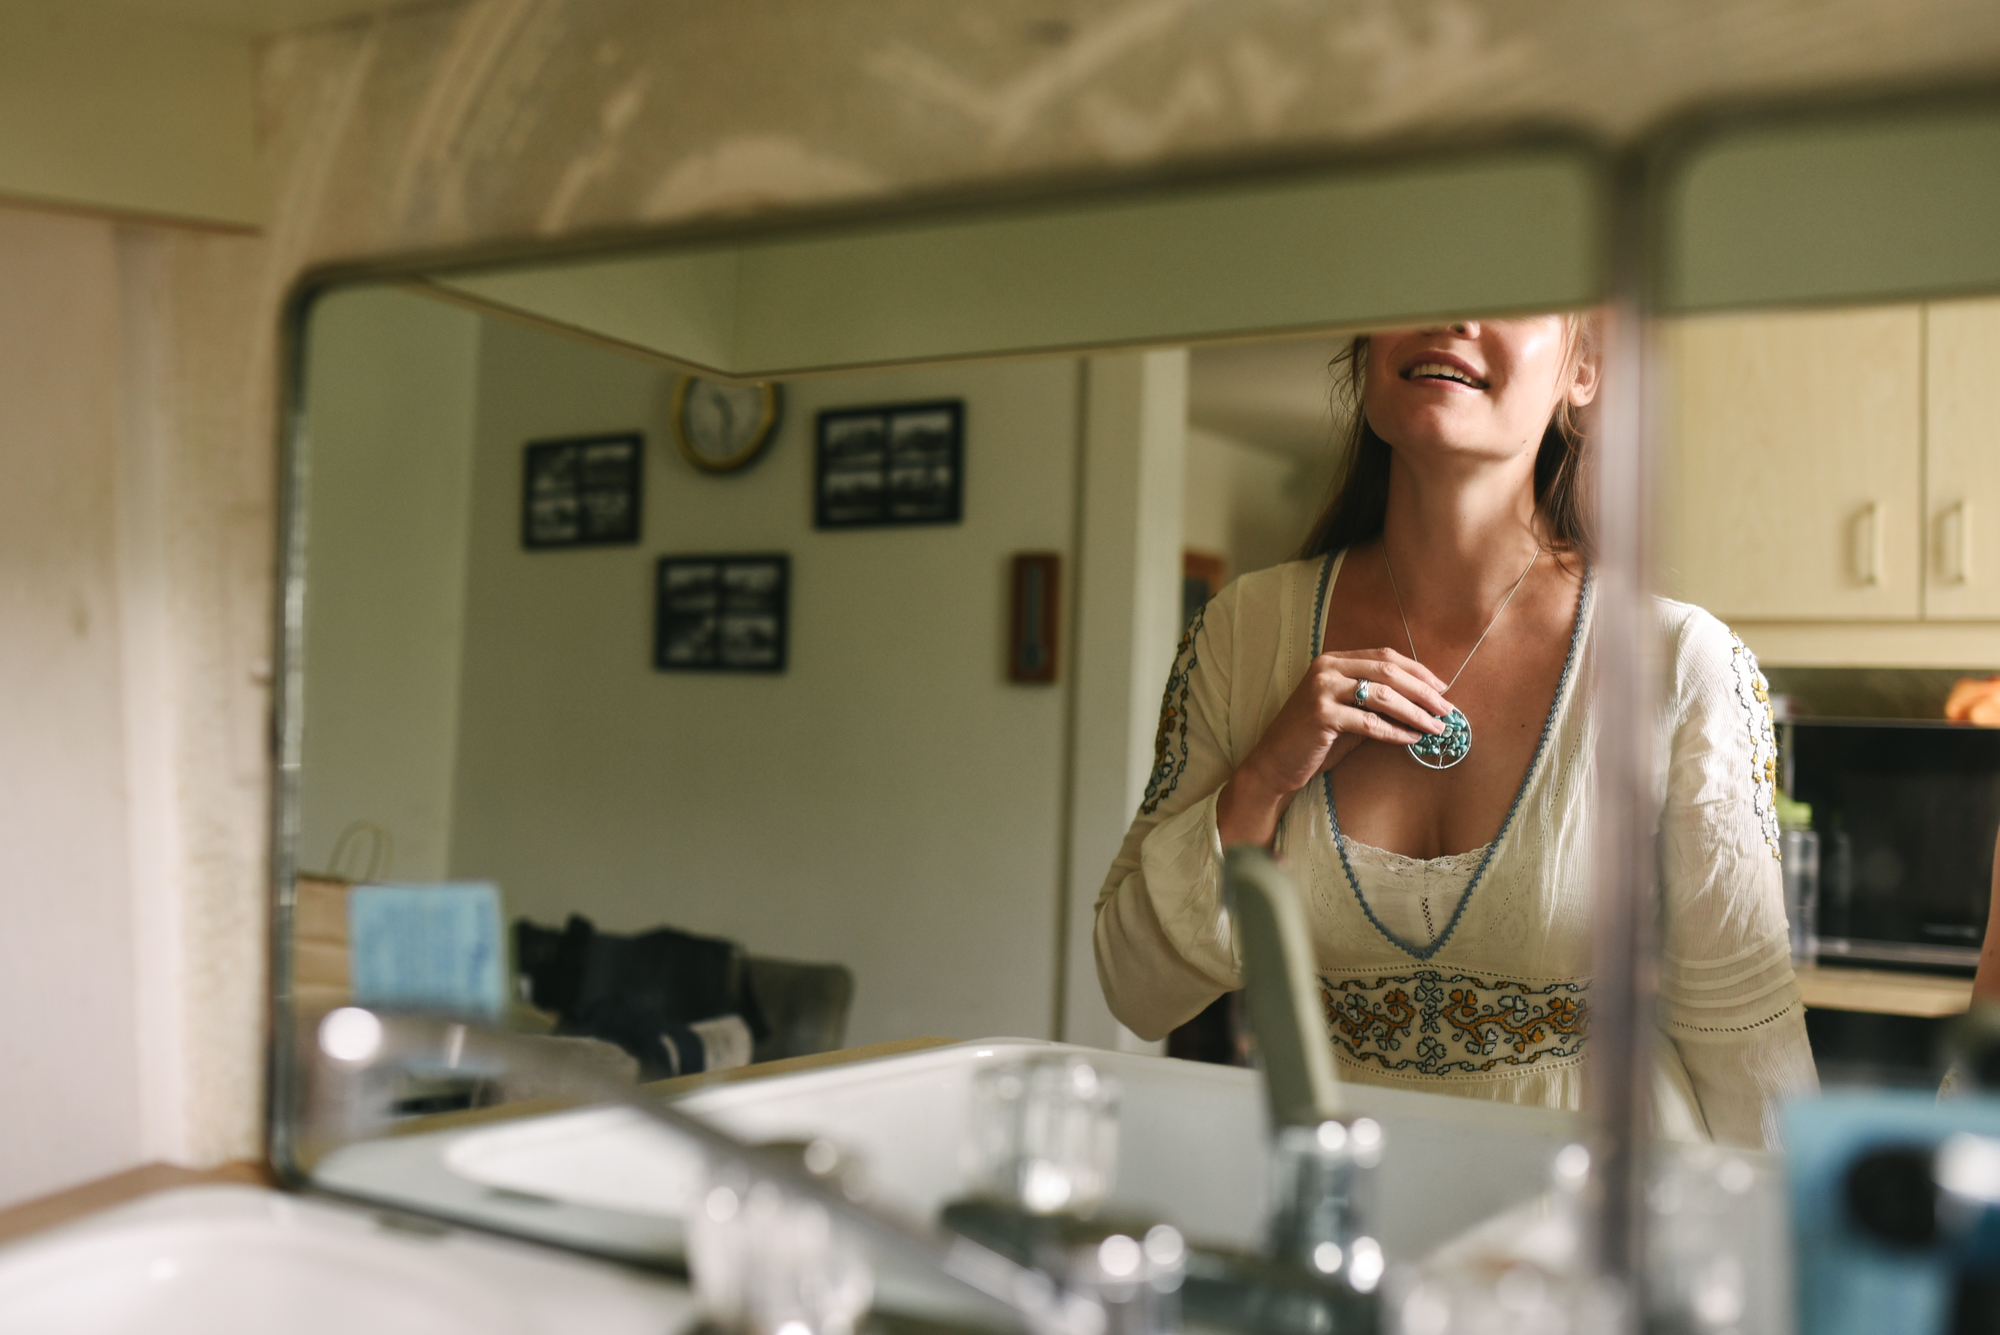  Mountains, Outdoors, Rustic, West Virginia, Maryland Wedding Photographer, DIY, Casual, Bride getting ready in mirror before ceremony 